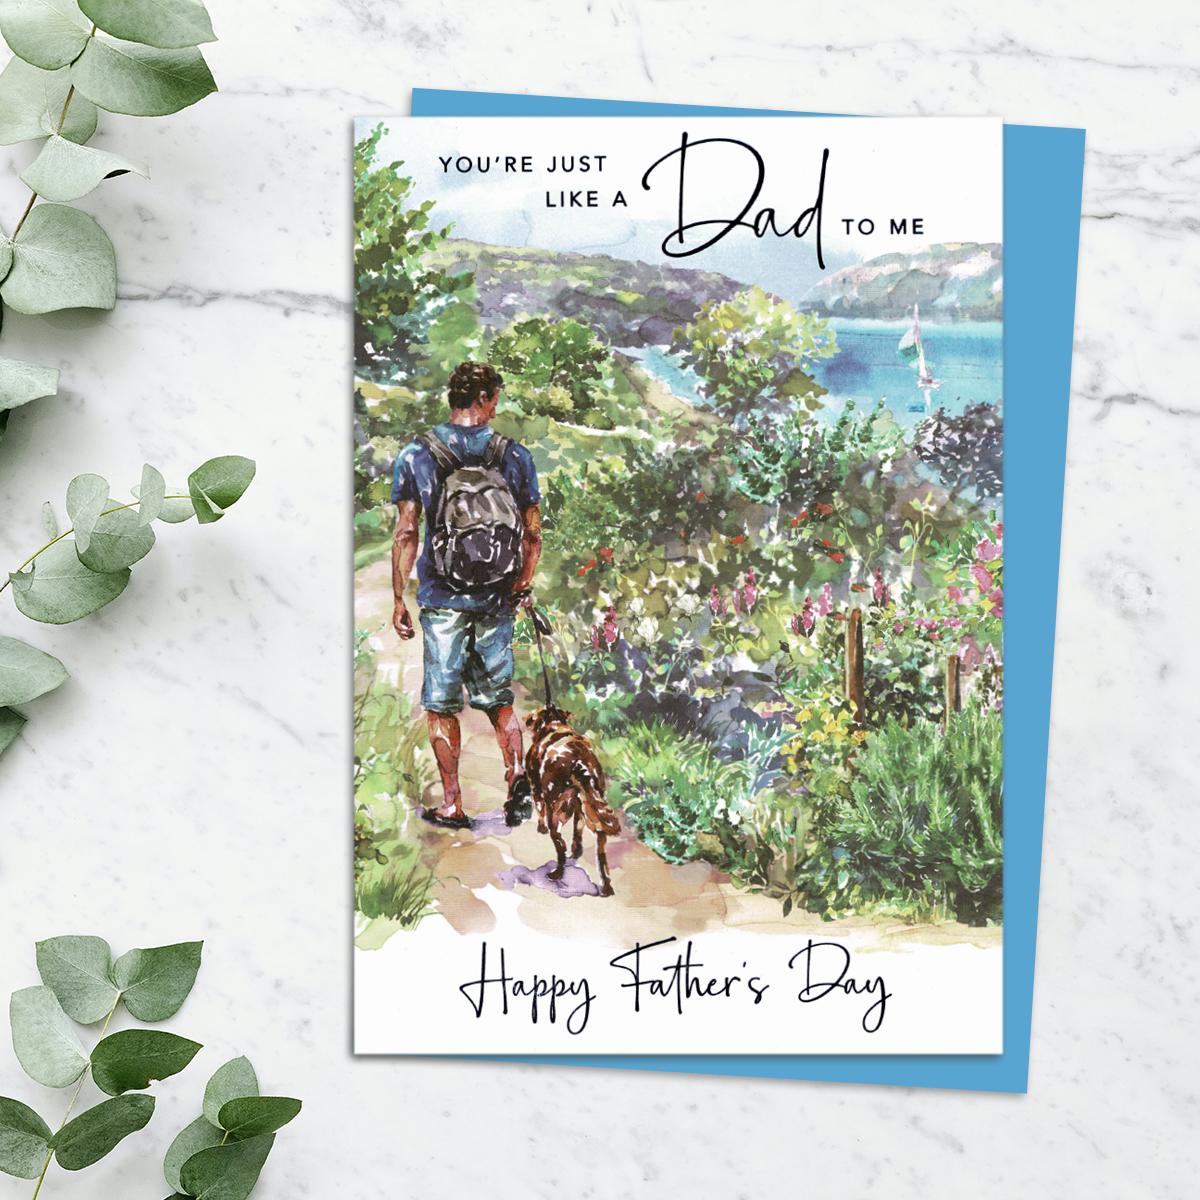 'You're Just Like A Dad To Me' Father's Day Card Featuring A Man Waling His dog Through The Hedgerow. With Added Blue Foiled Lettering And Blue Envelope